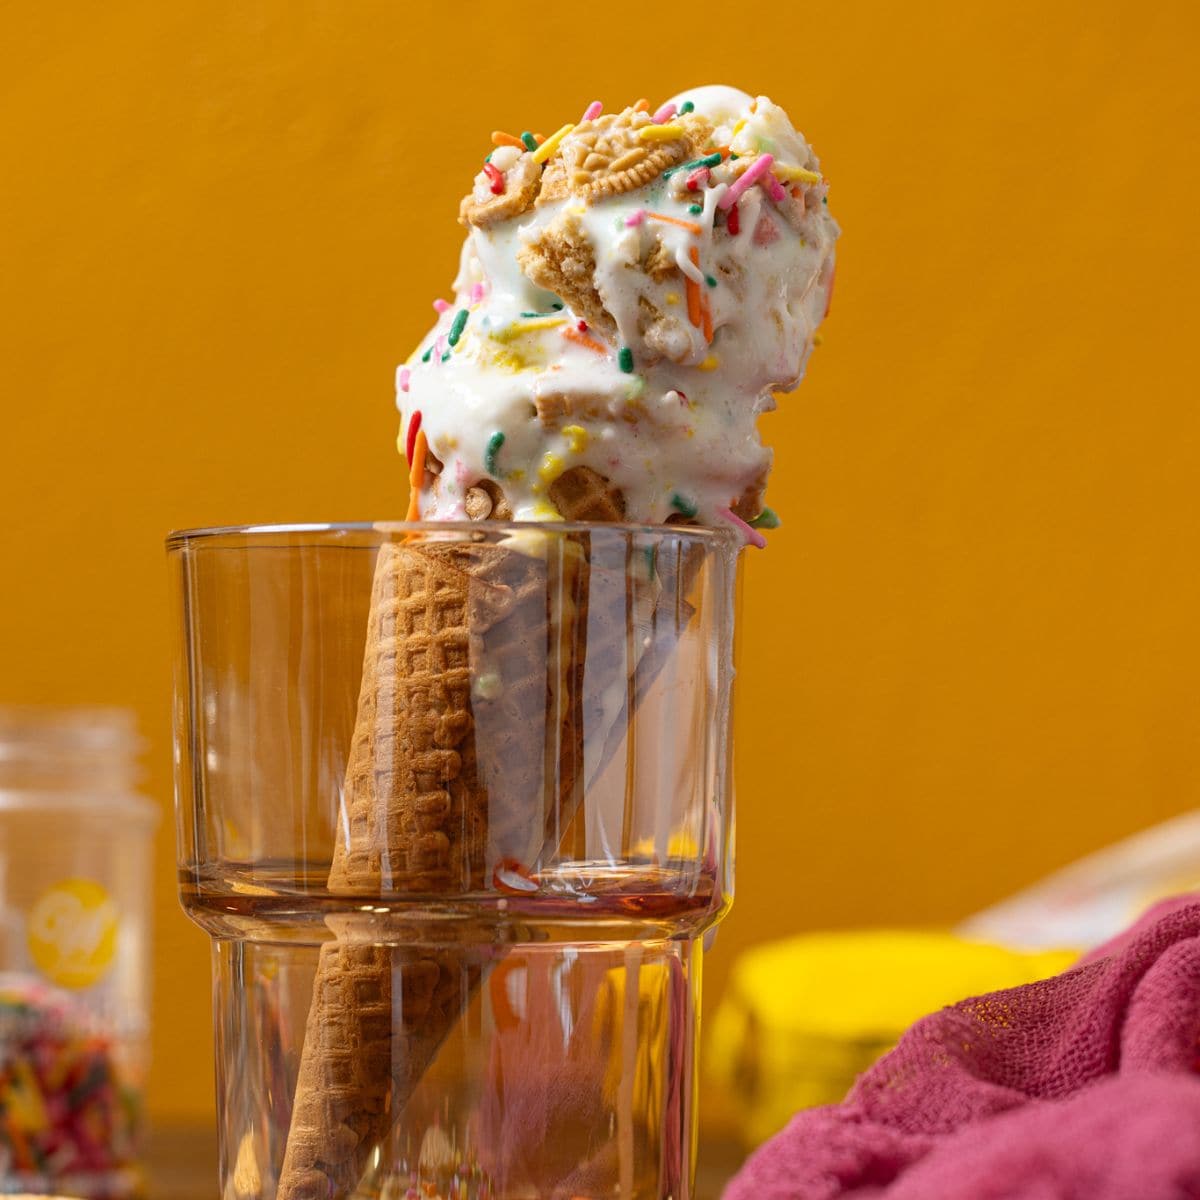 Ice cream cone in glassware in cookies, pink napkin, and sprinkles.